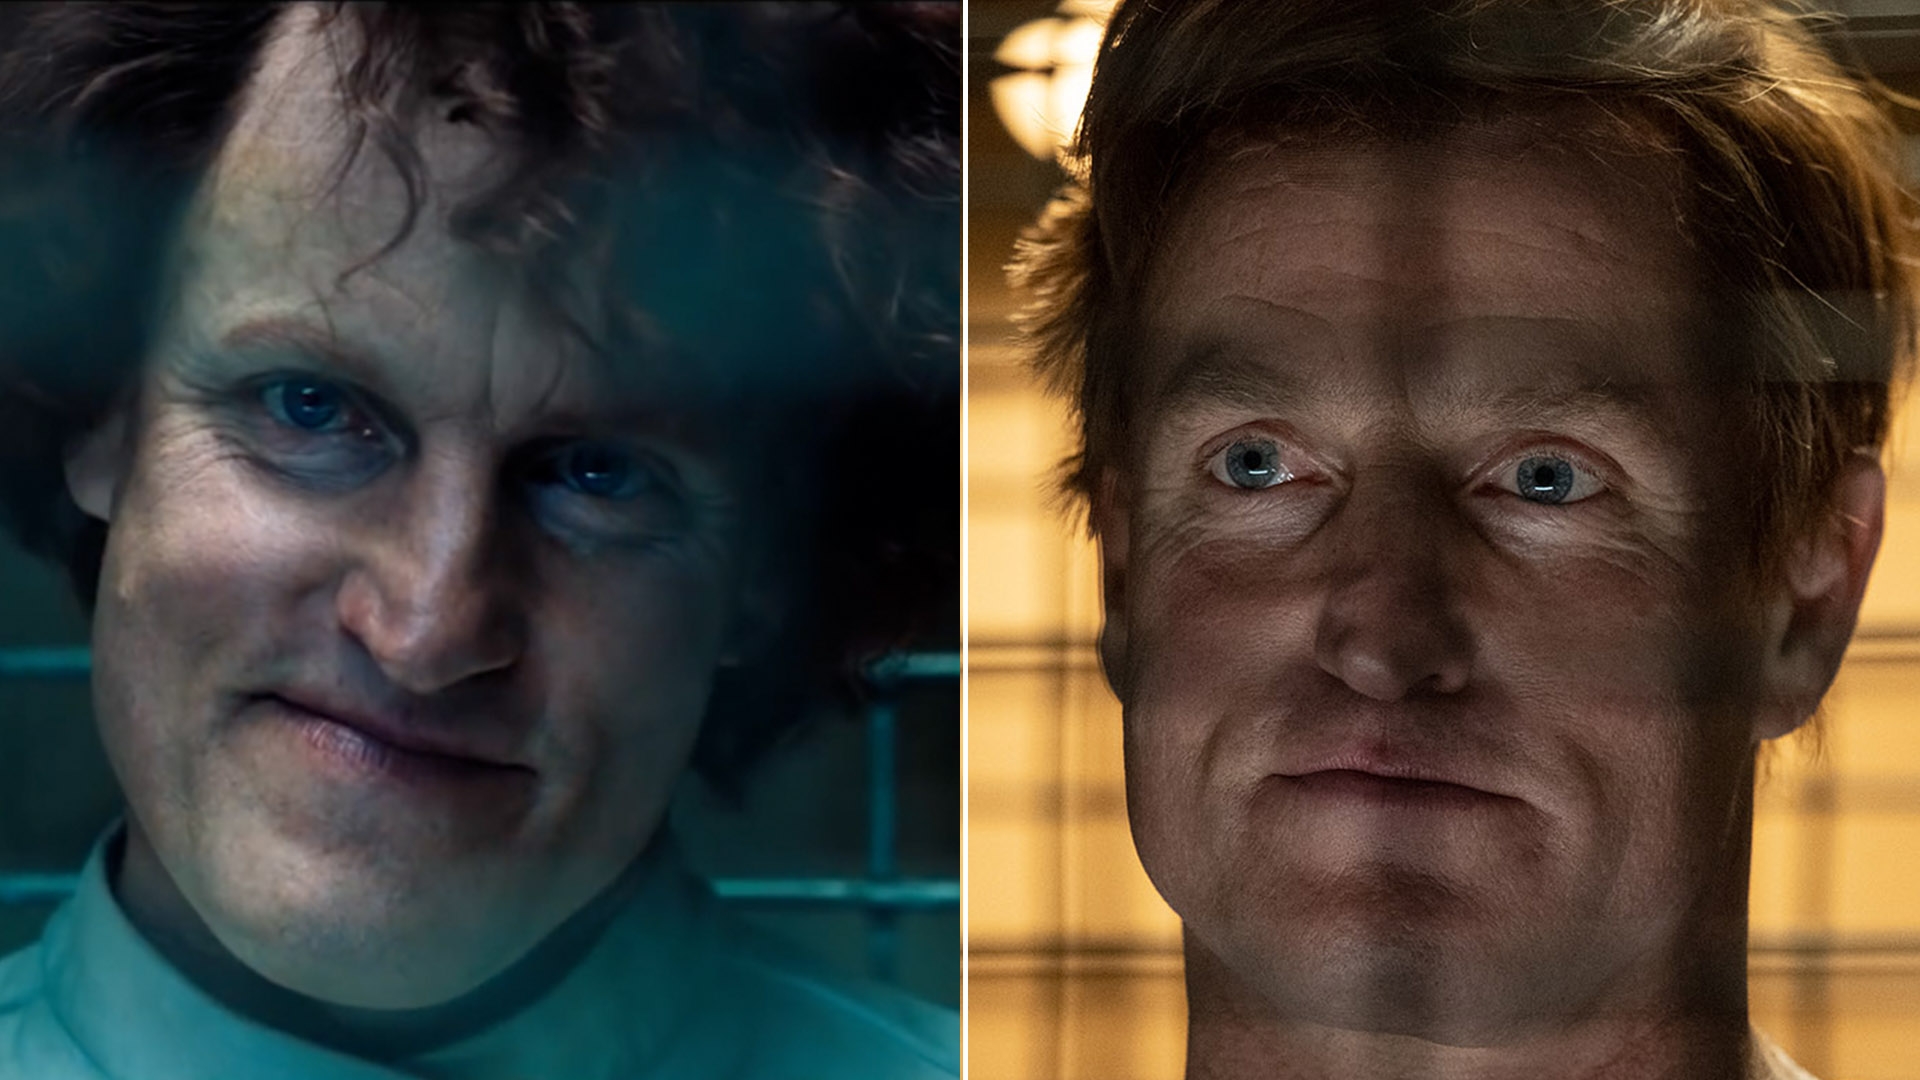 Woody Harrelson tells us why they cut Cletus’ curly hair for Venom: Let There Be Carnage